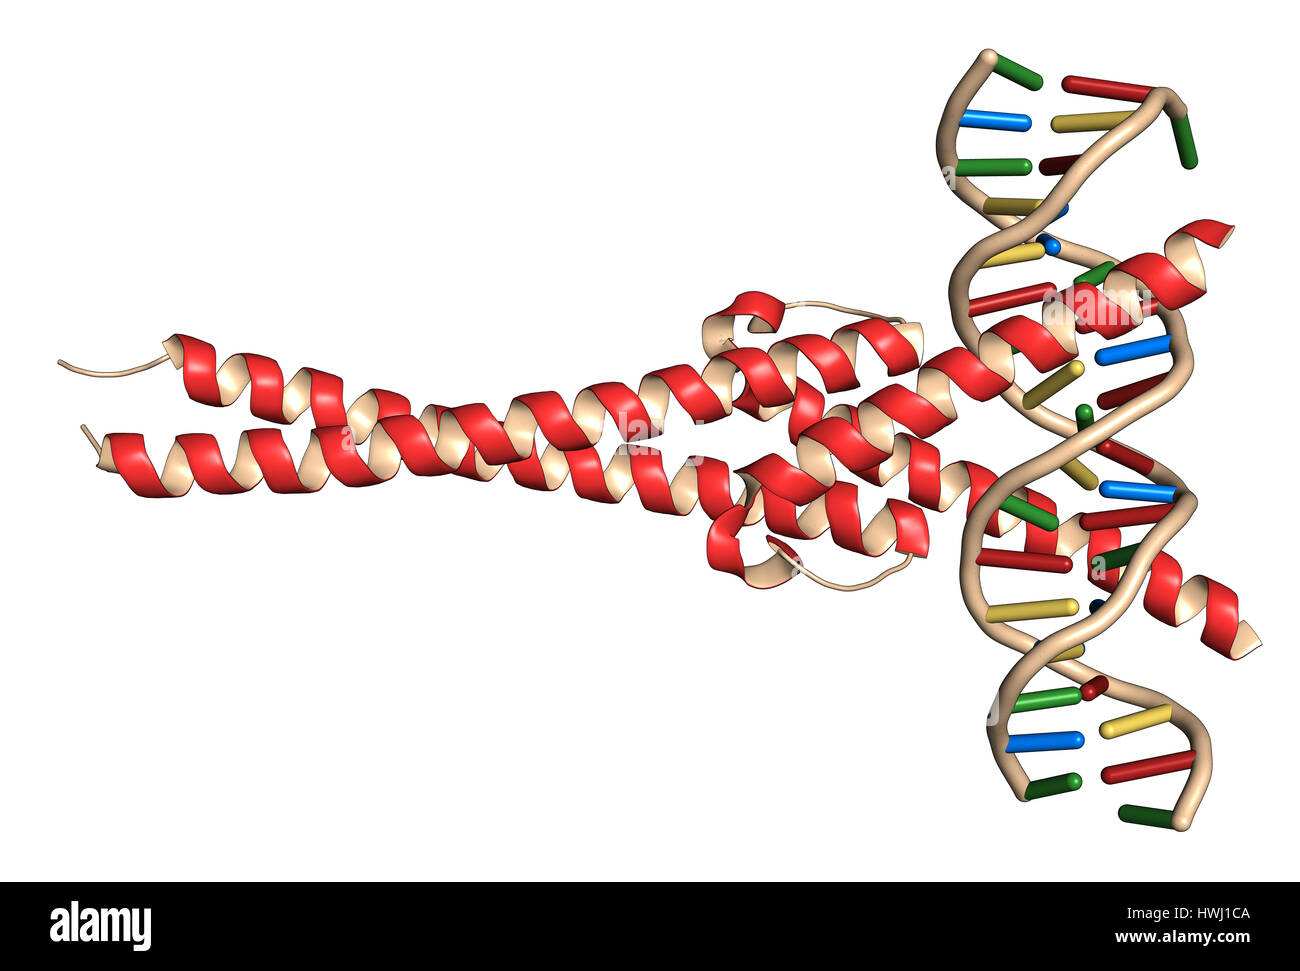 c-Myc and Max transcription factors bound to DNA. 3D illustration. Cartoon representation: protein colored red; DNA ladder model, colored per nucleoba Stock Photo